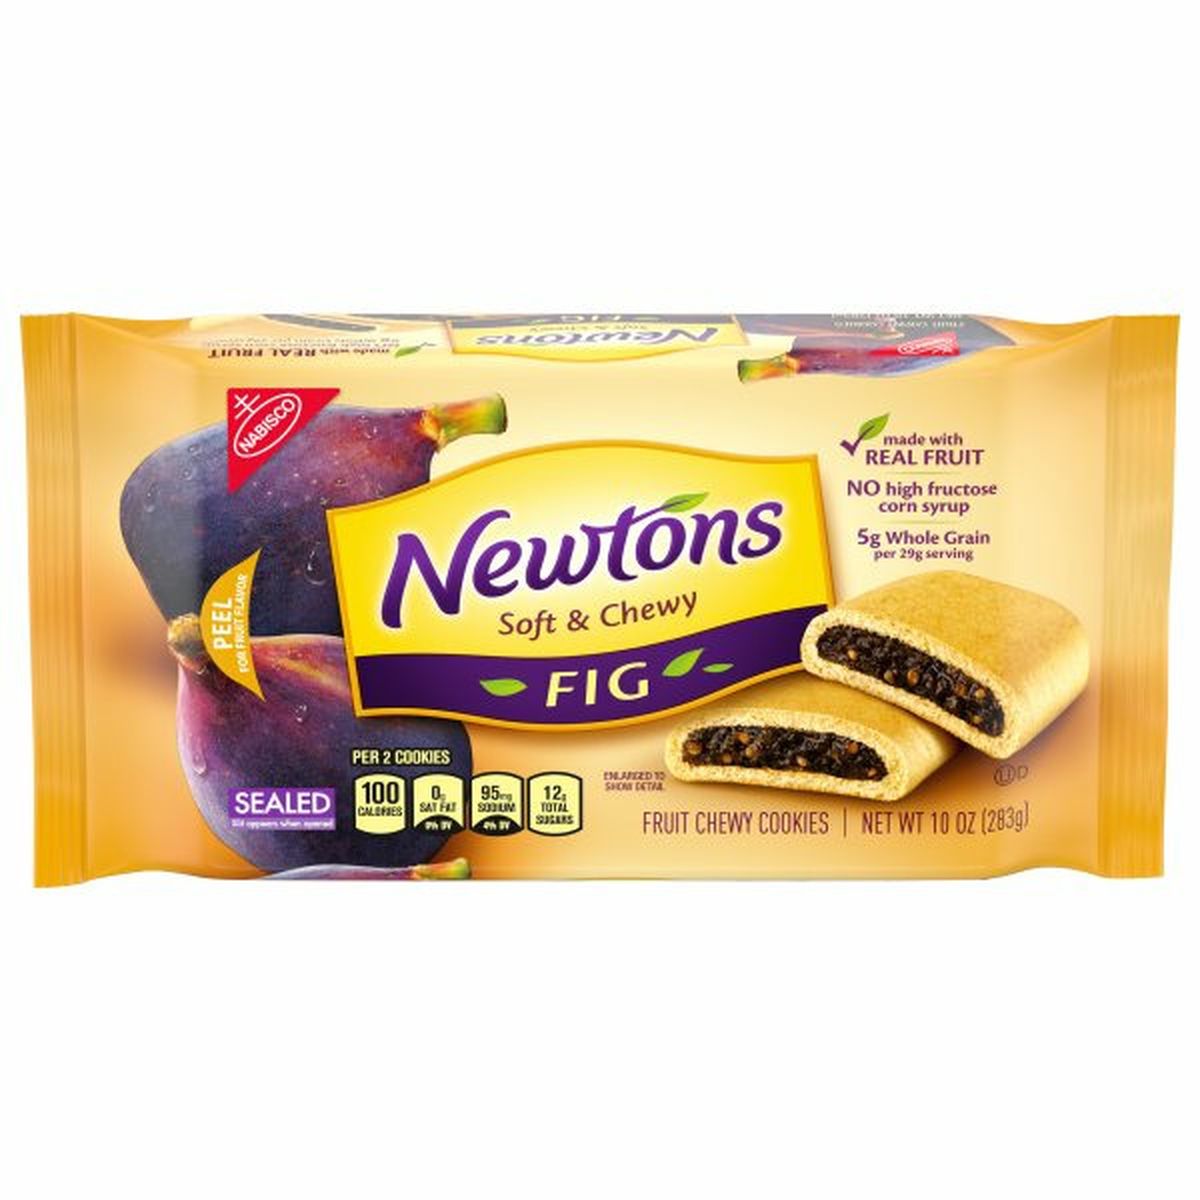 Calories in Newtons Cookies, Soft & Fruit Chewy, Fig